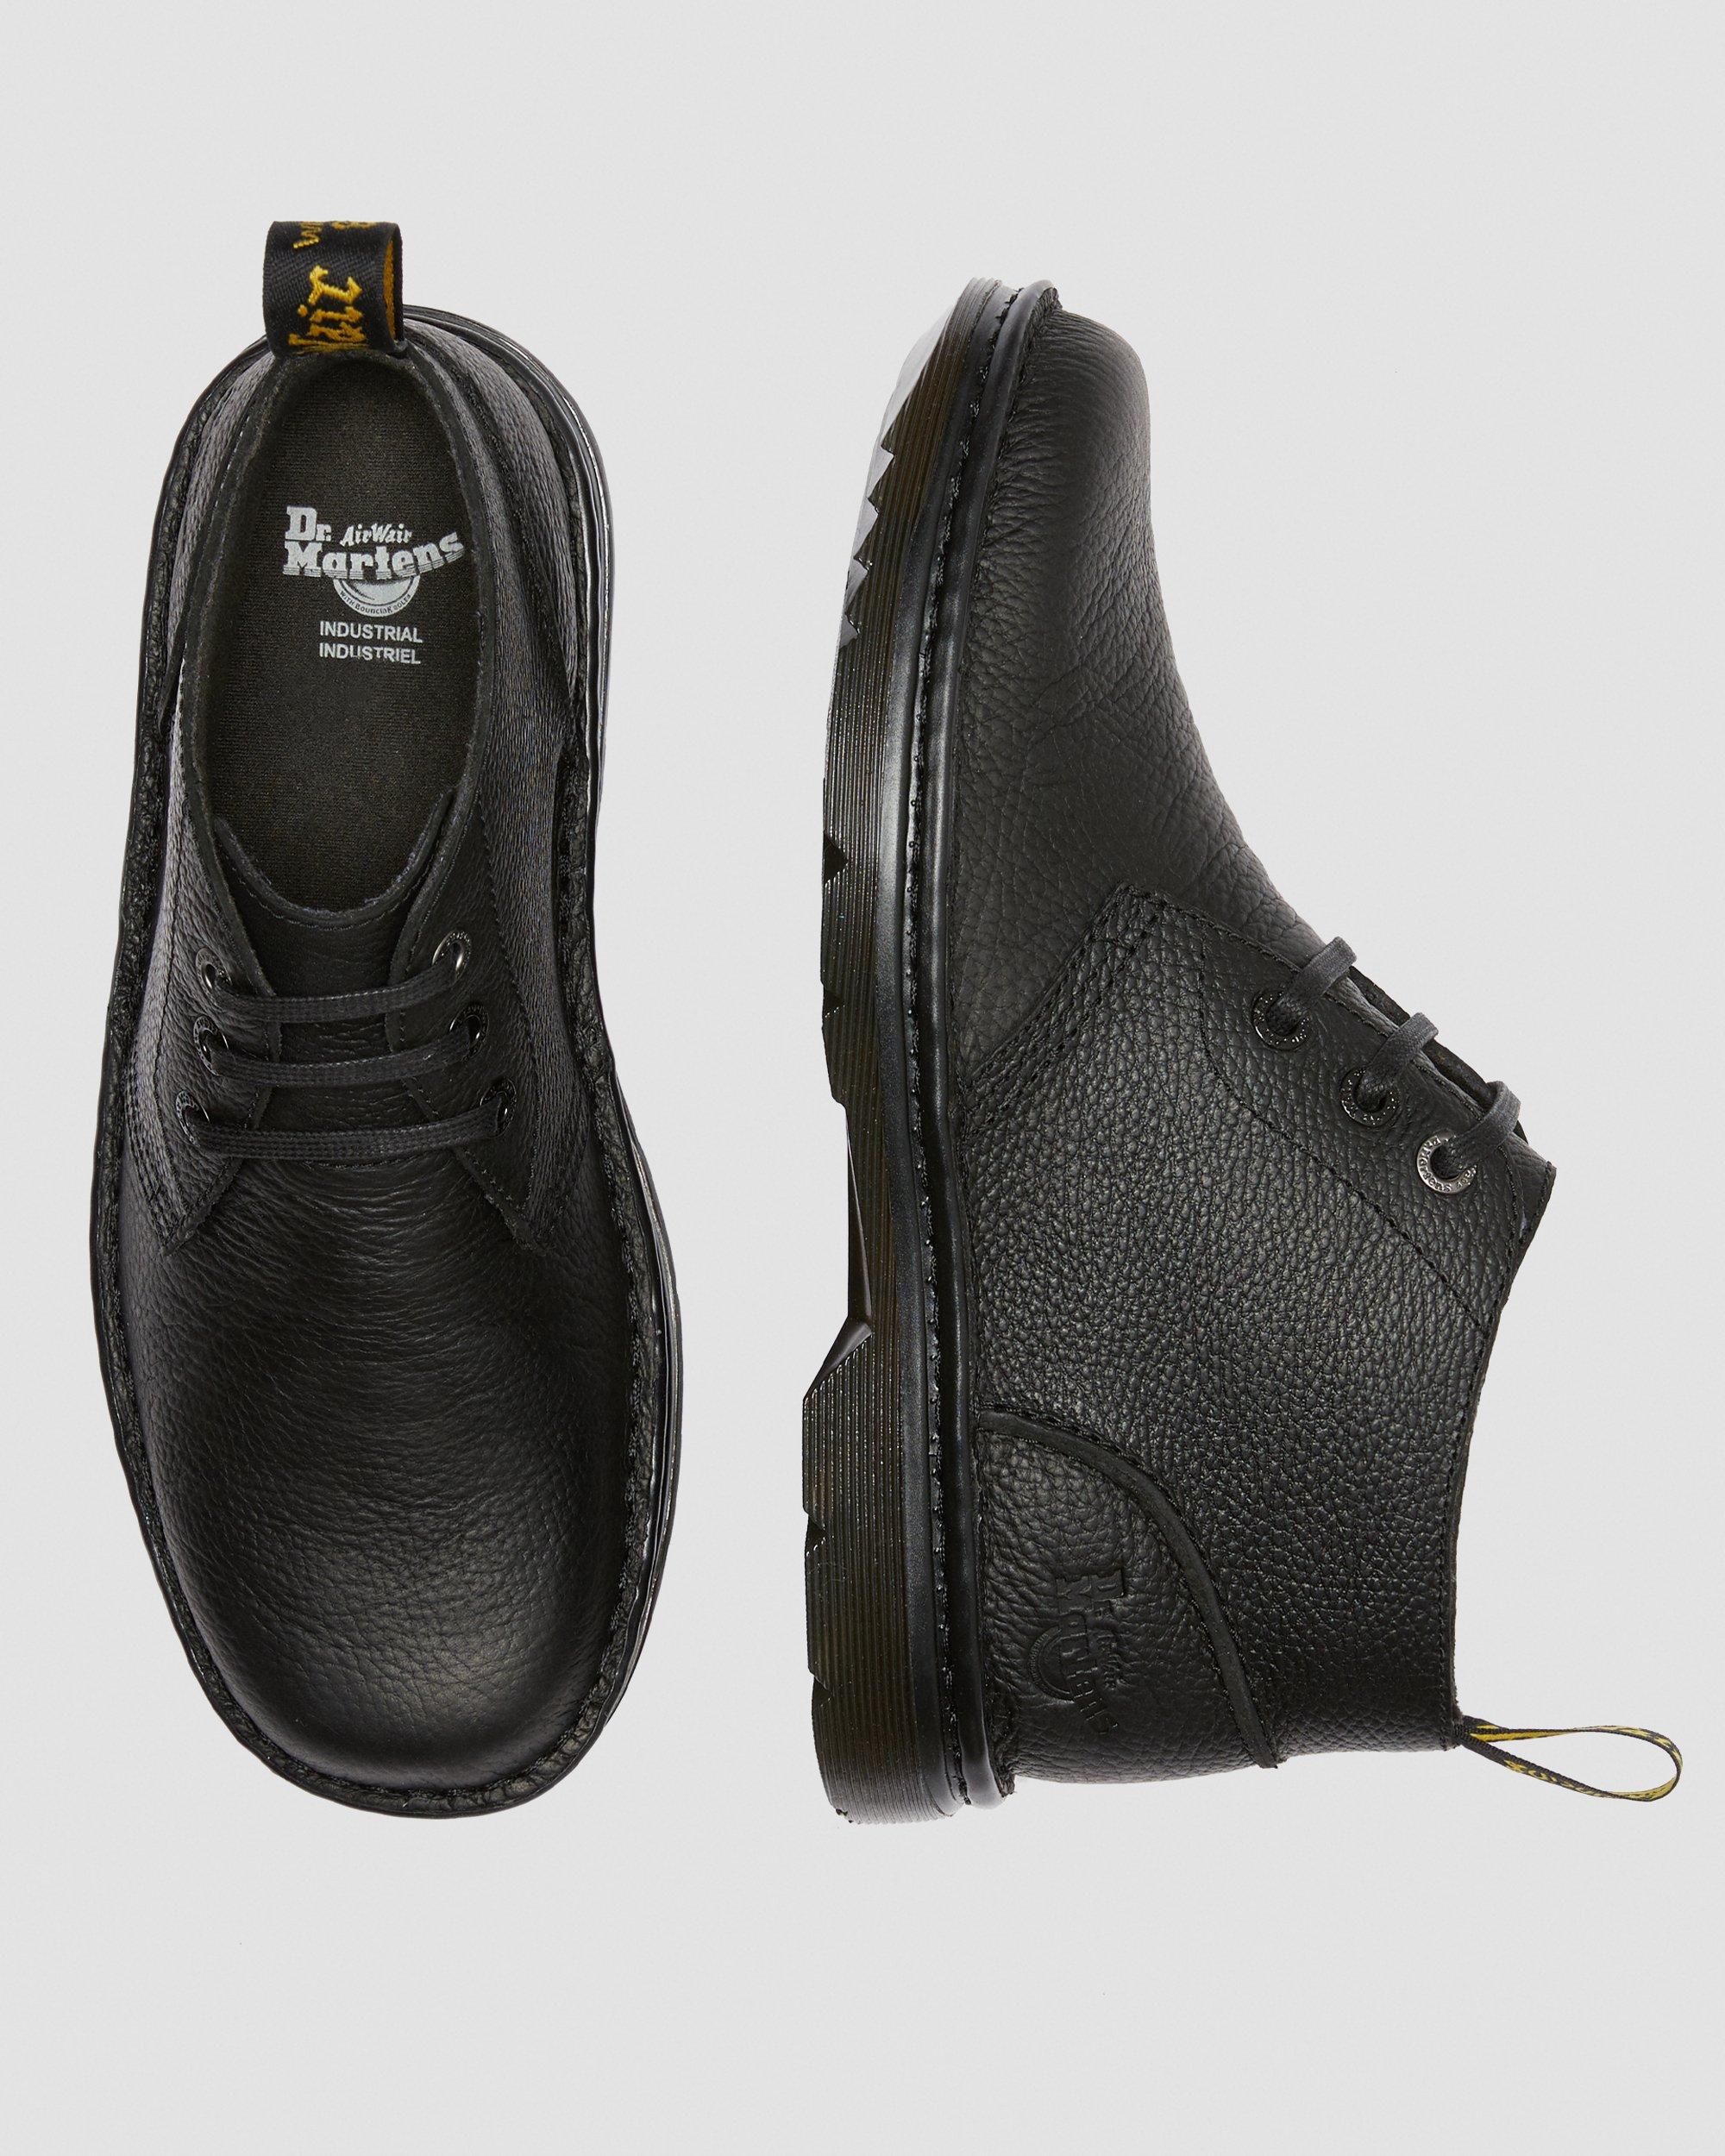 SUSSEX BEAR TRACK SLIP RESISTANT CHUKKA BOOTS | Dr. Martens Official